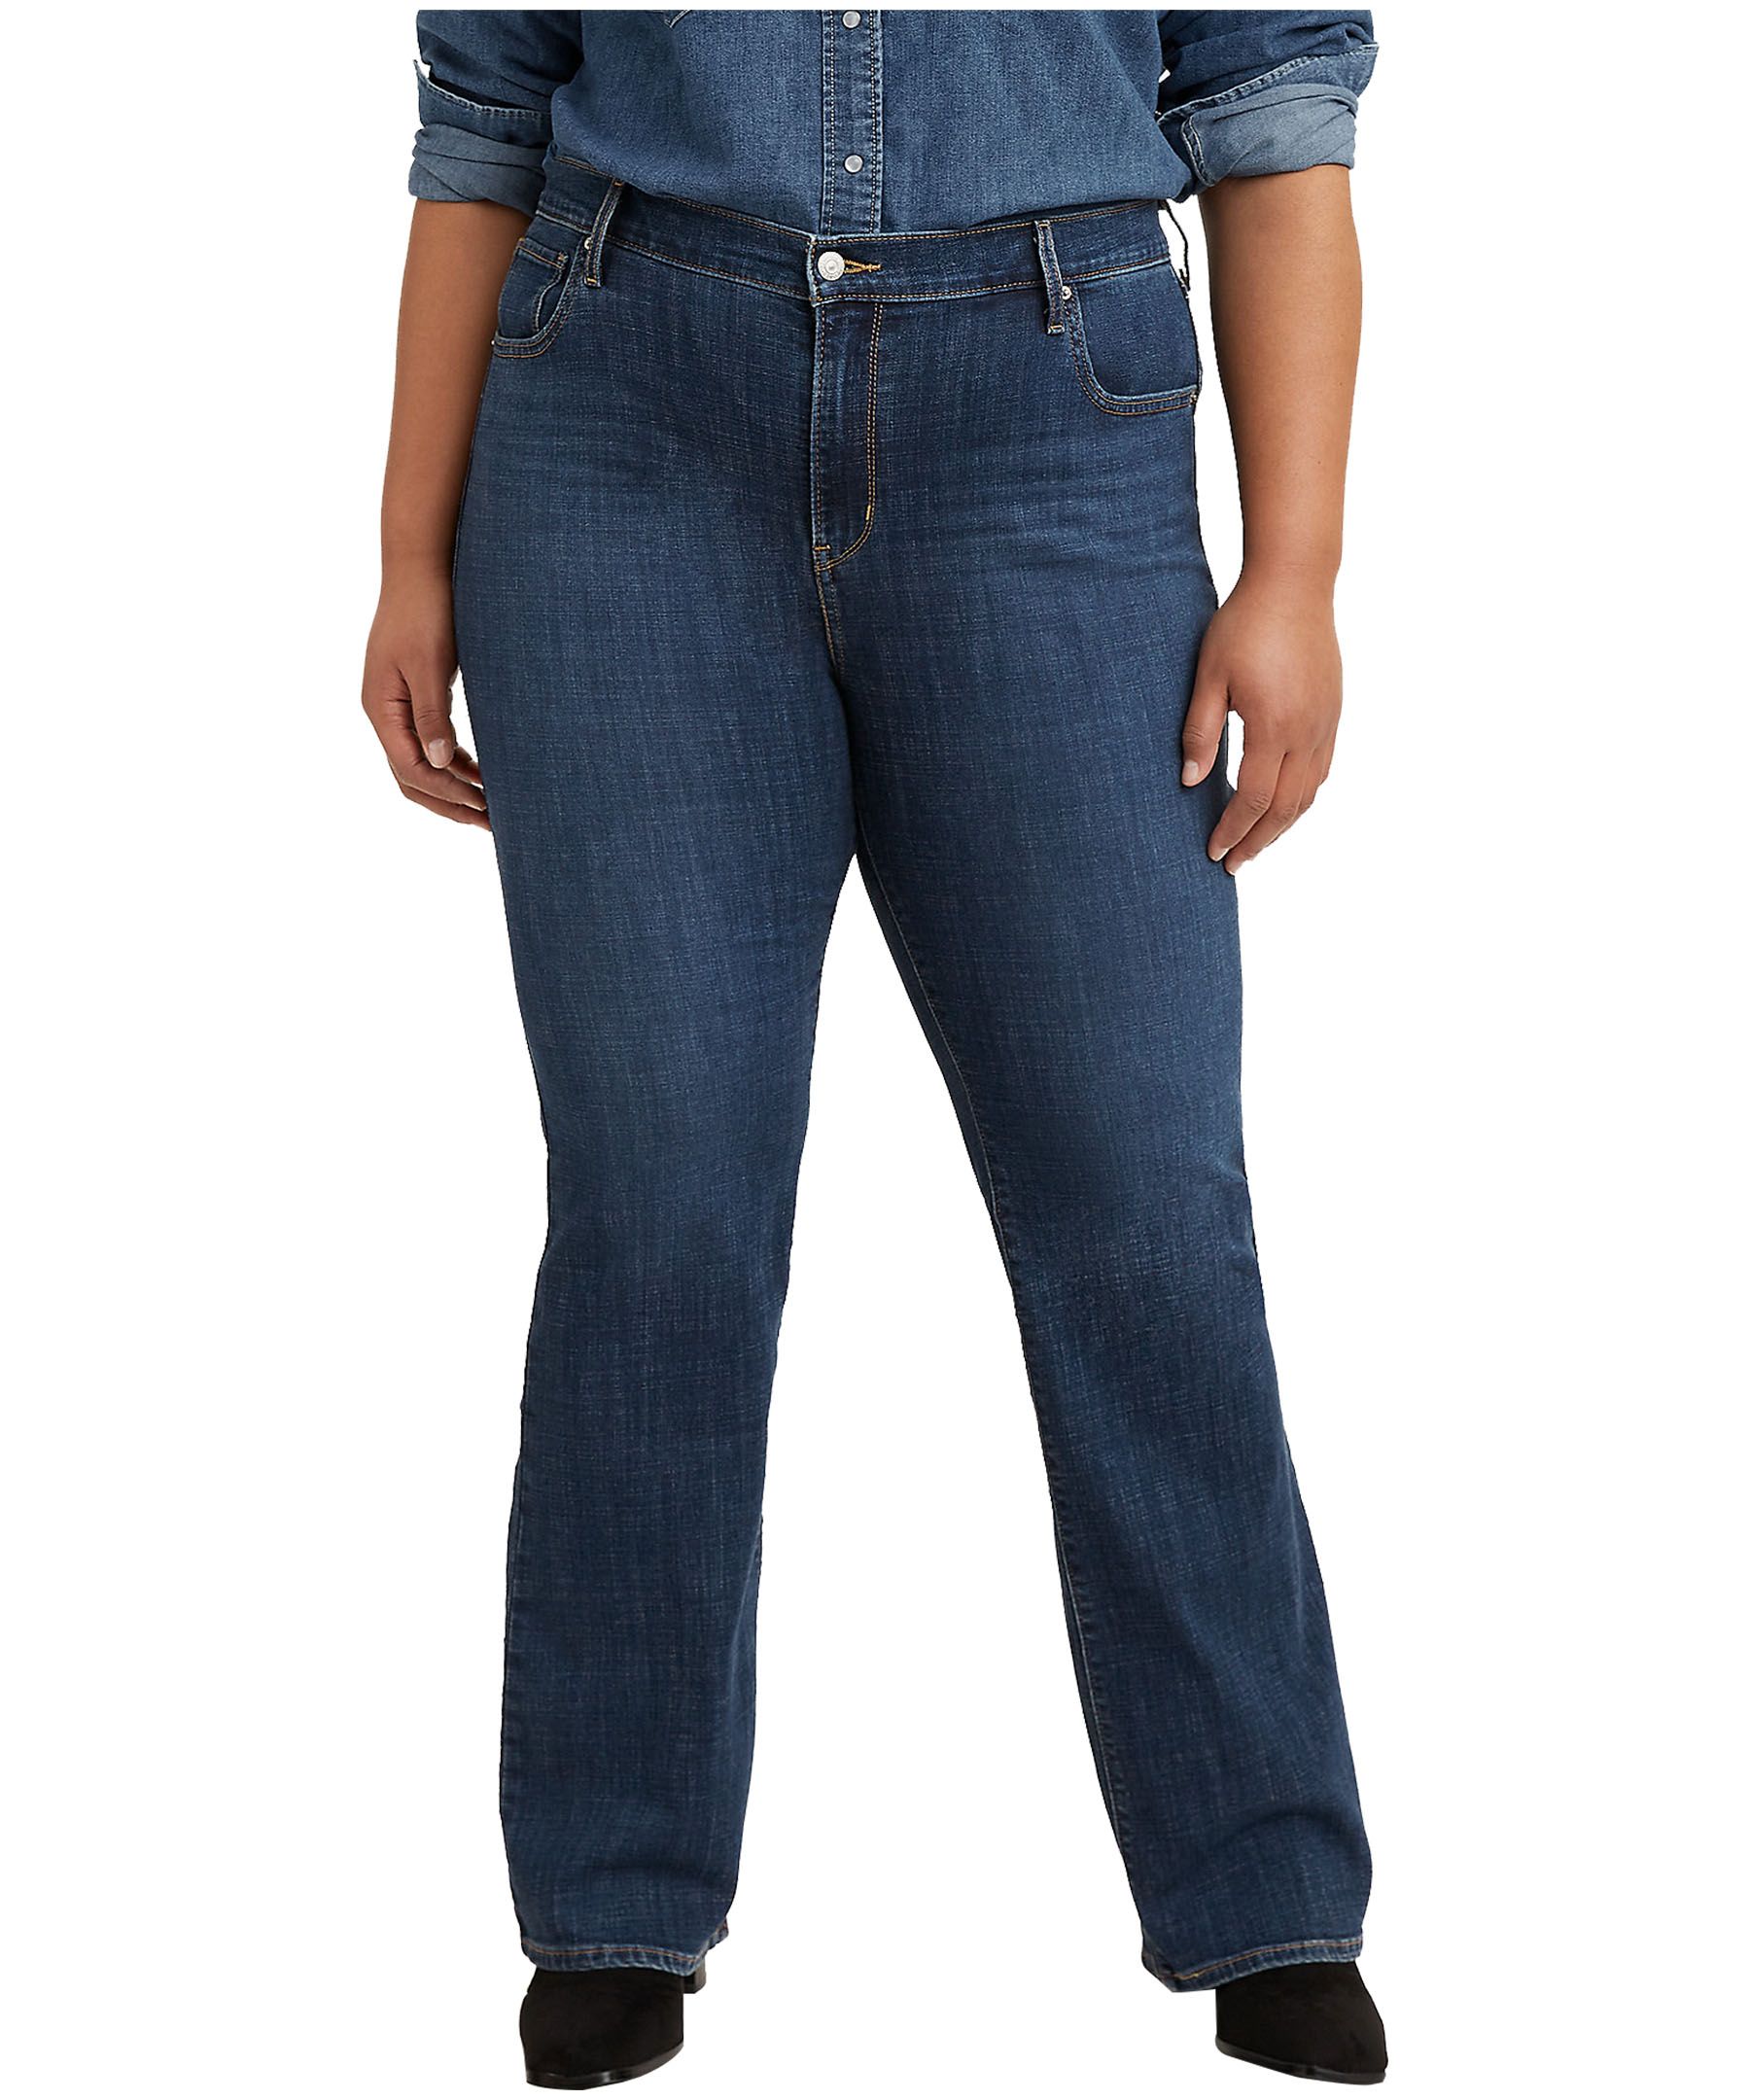 Levi's Women's 725 High Rise Bootcut Jeans - Plus Size | Marks